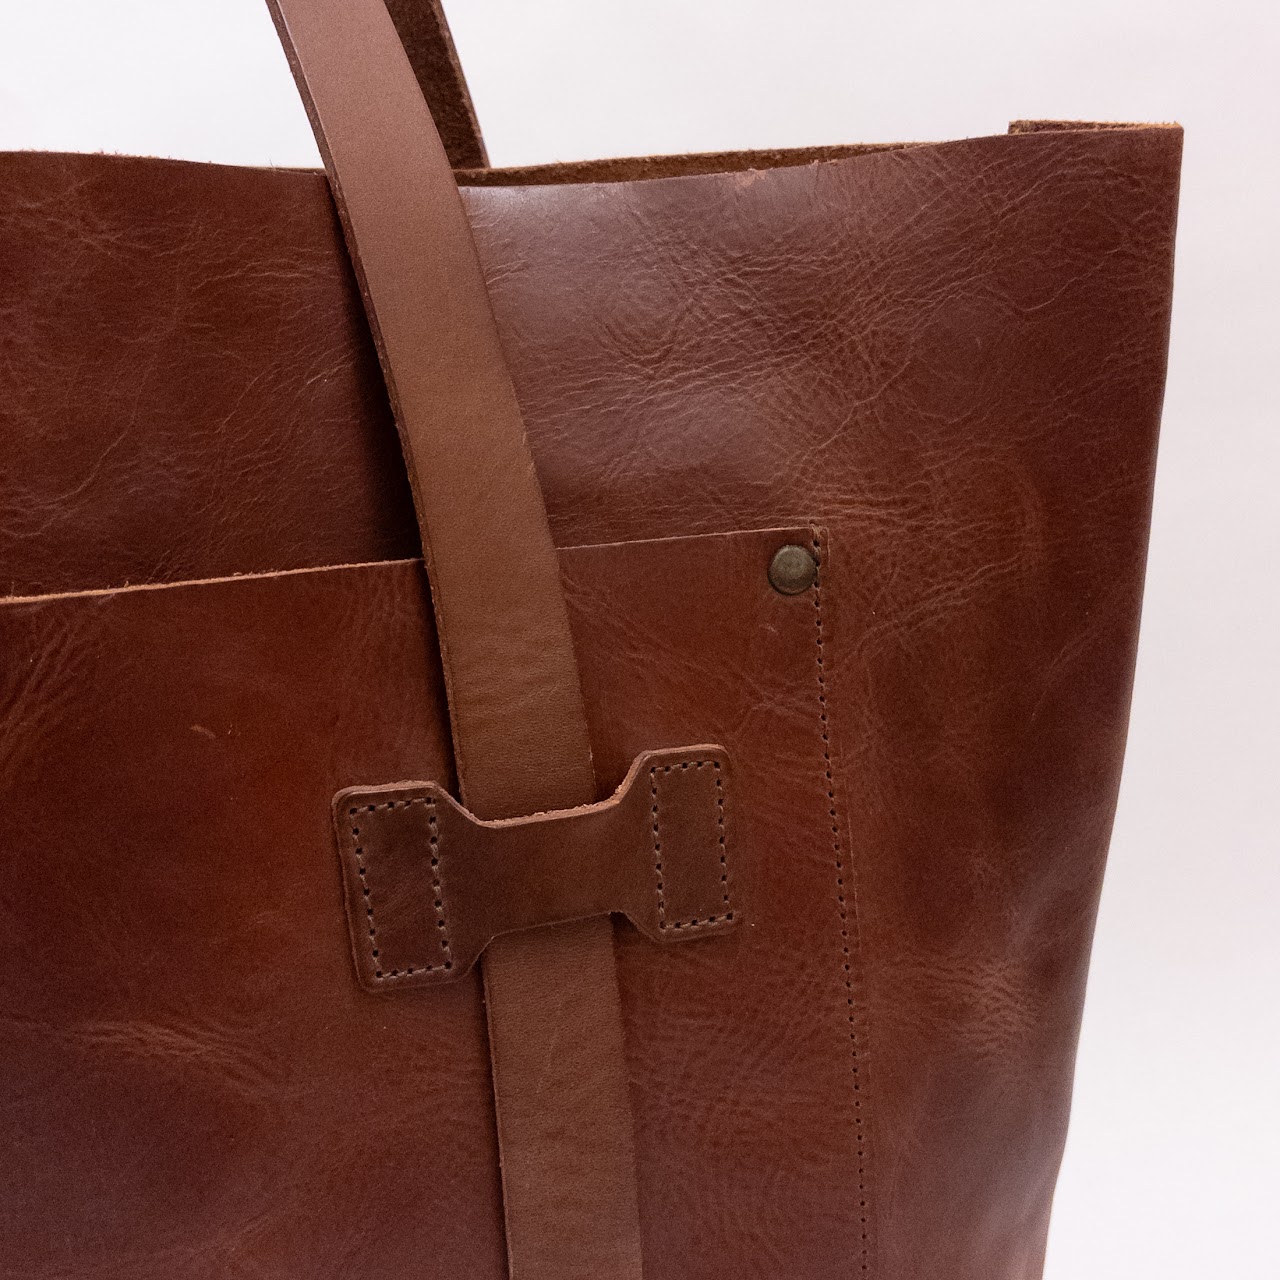 Whipping Post WP-05 Leather Tote Bag